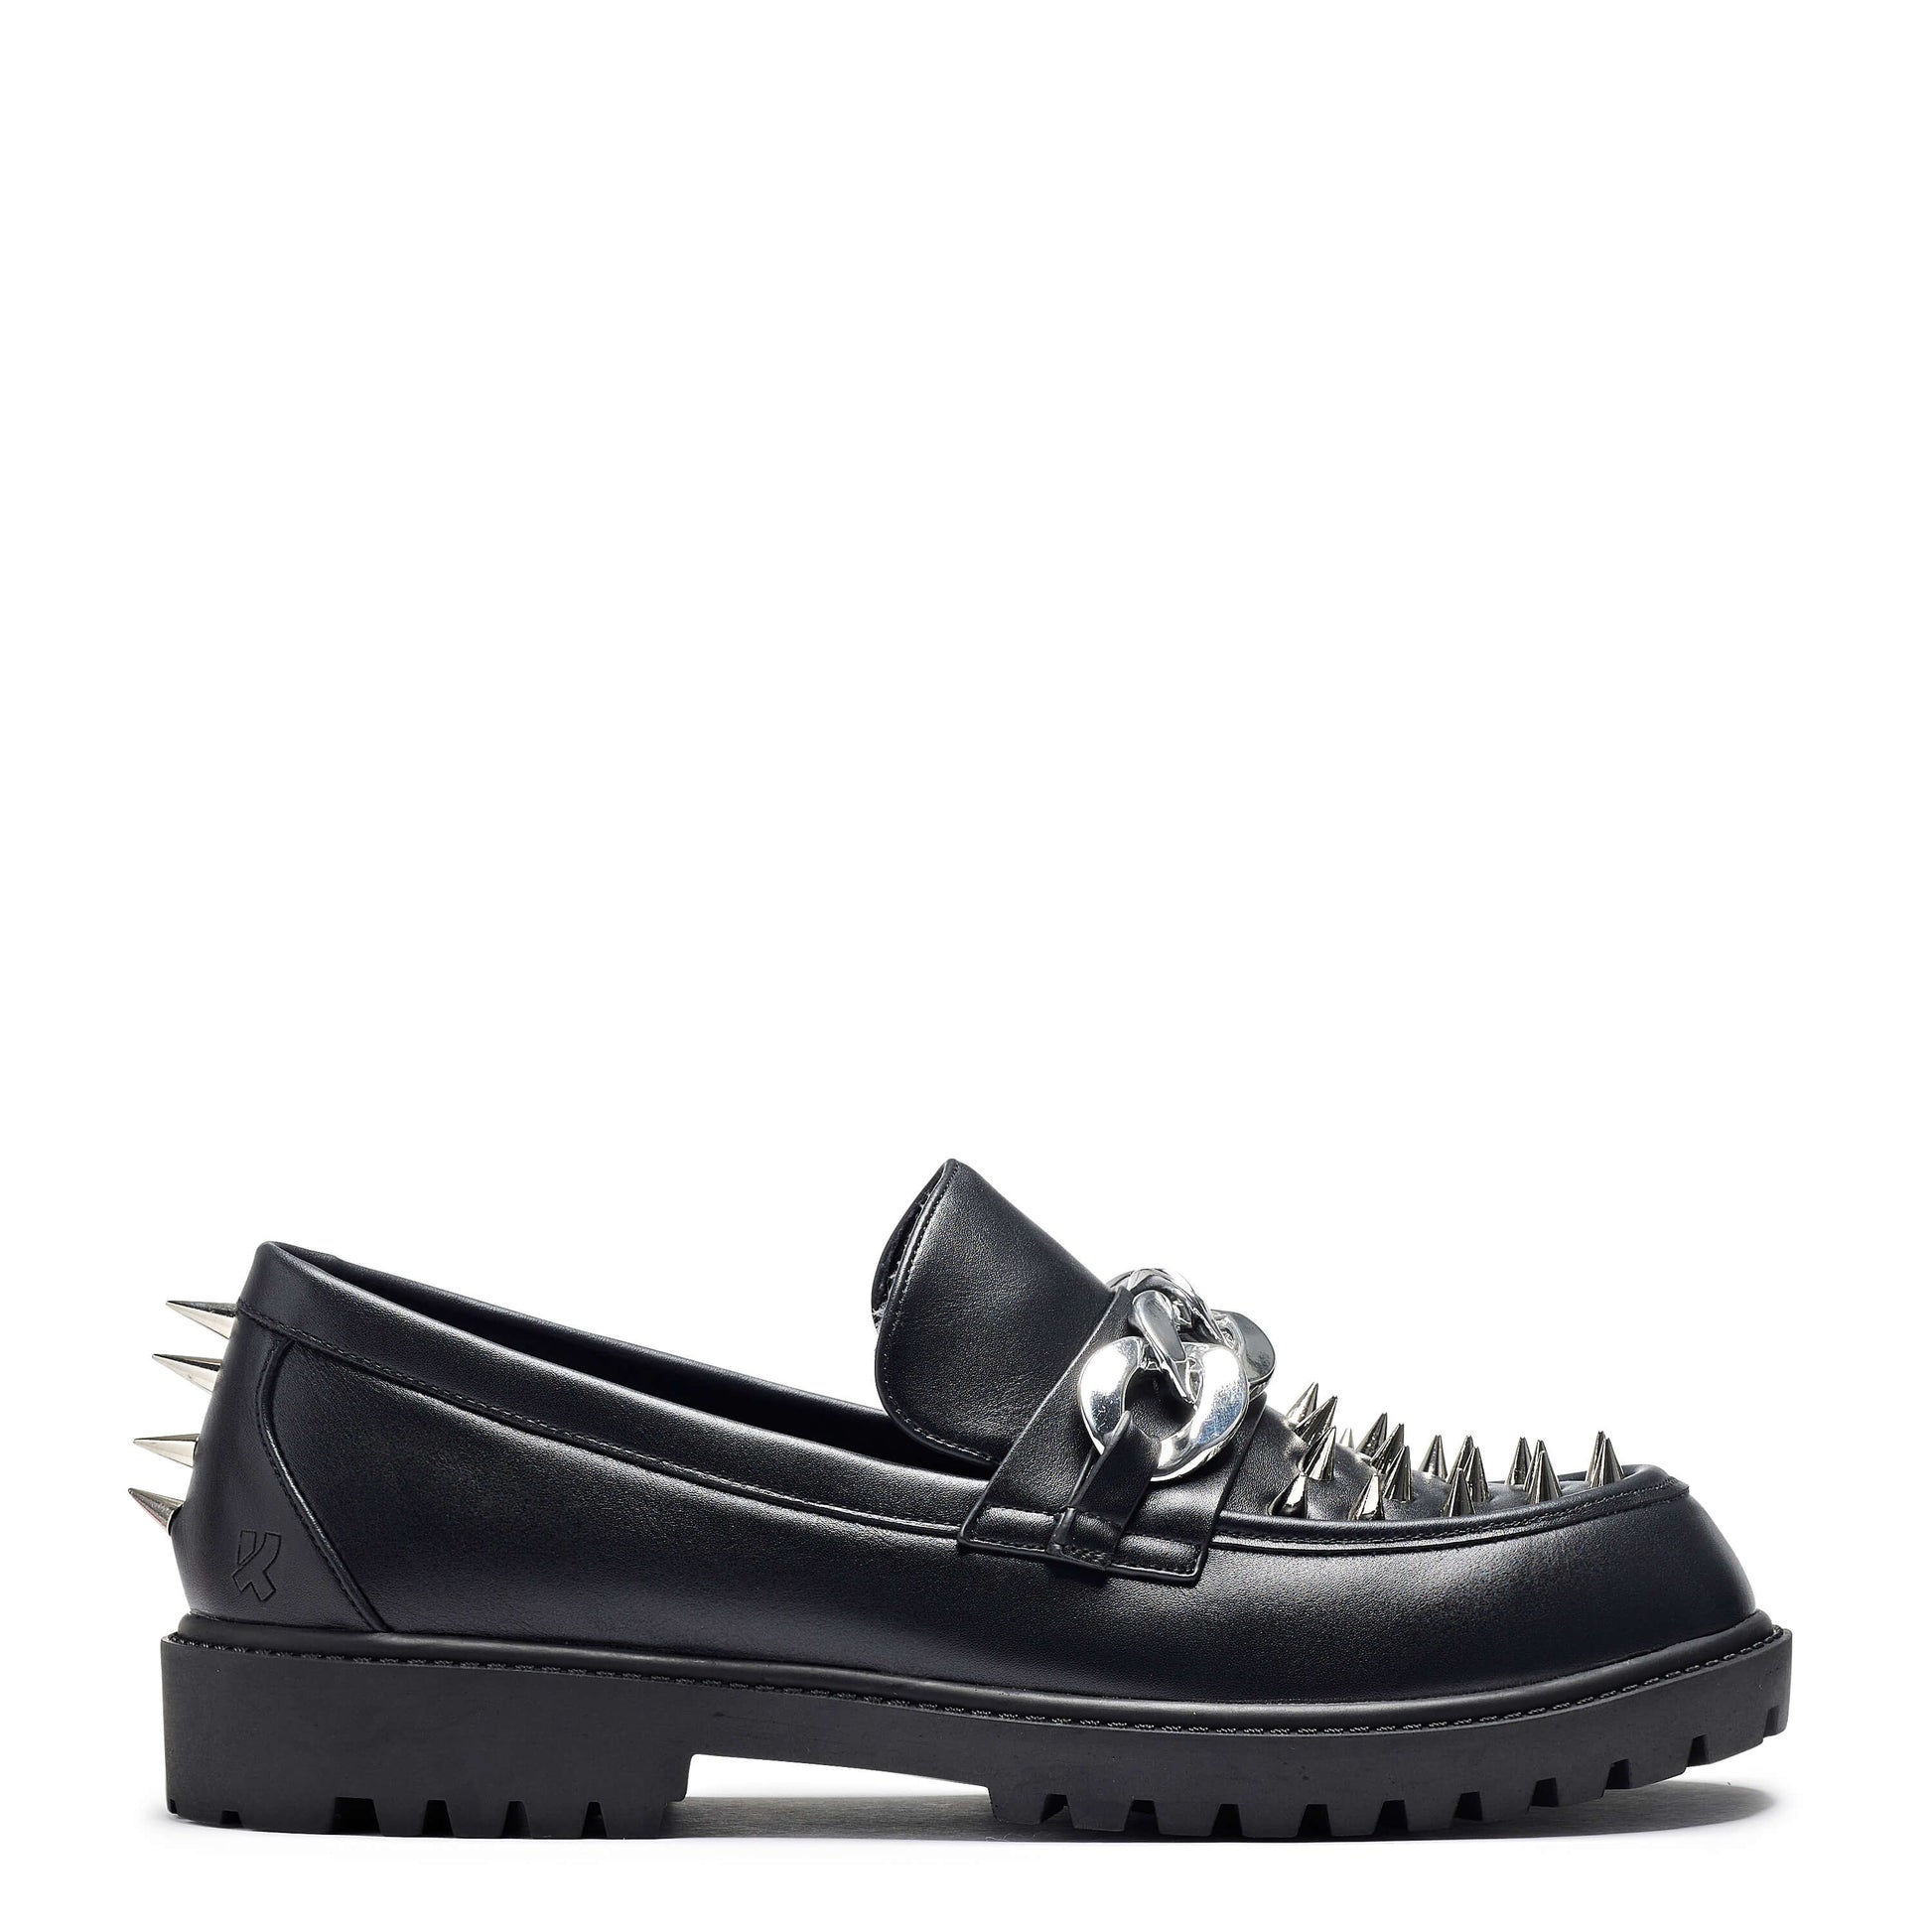 The Grave Warden Men's Spiked Loafers - Shoes - KOI Footwear - Black - Side View